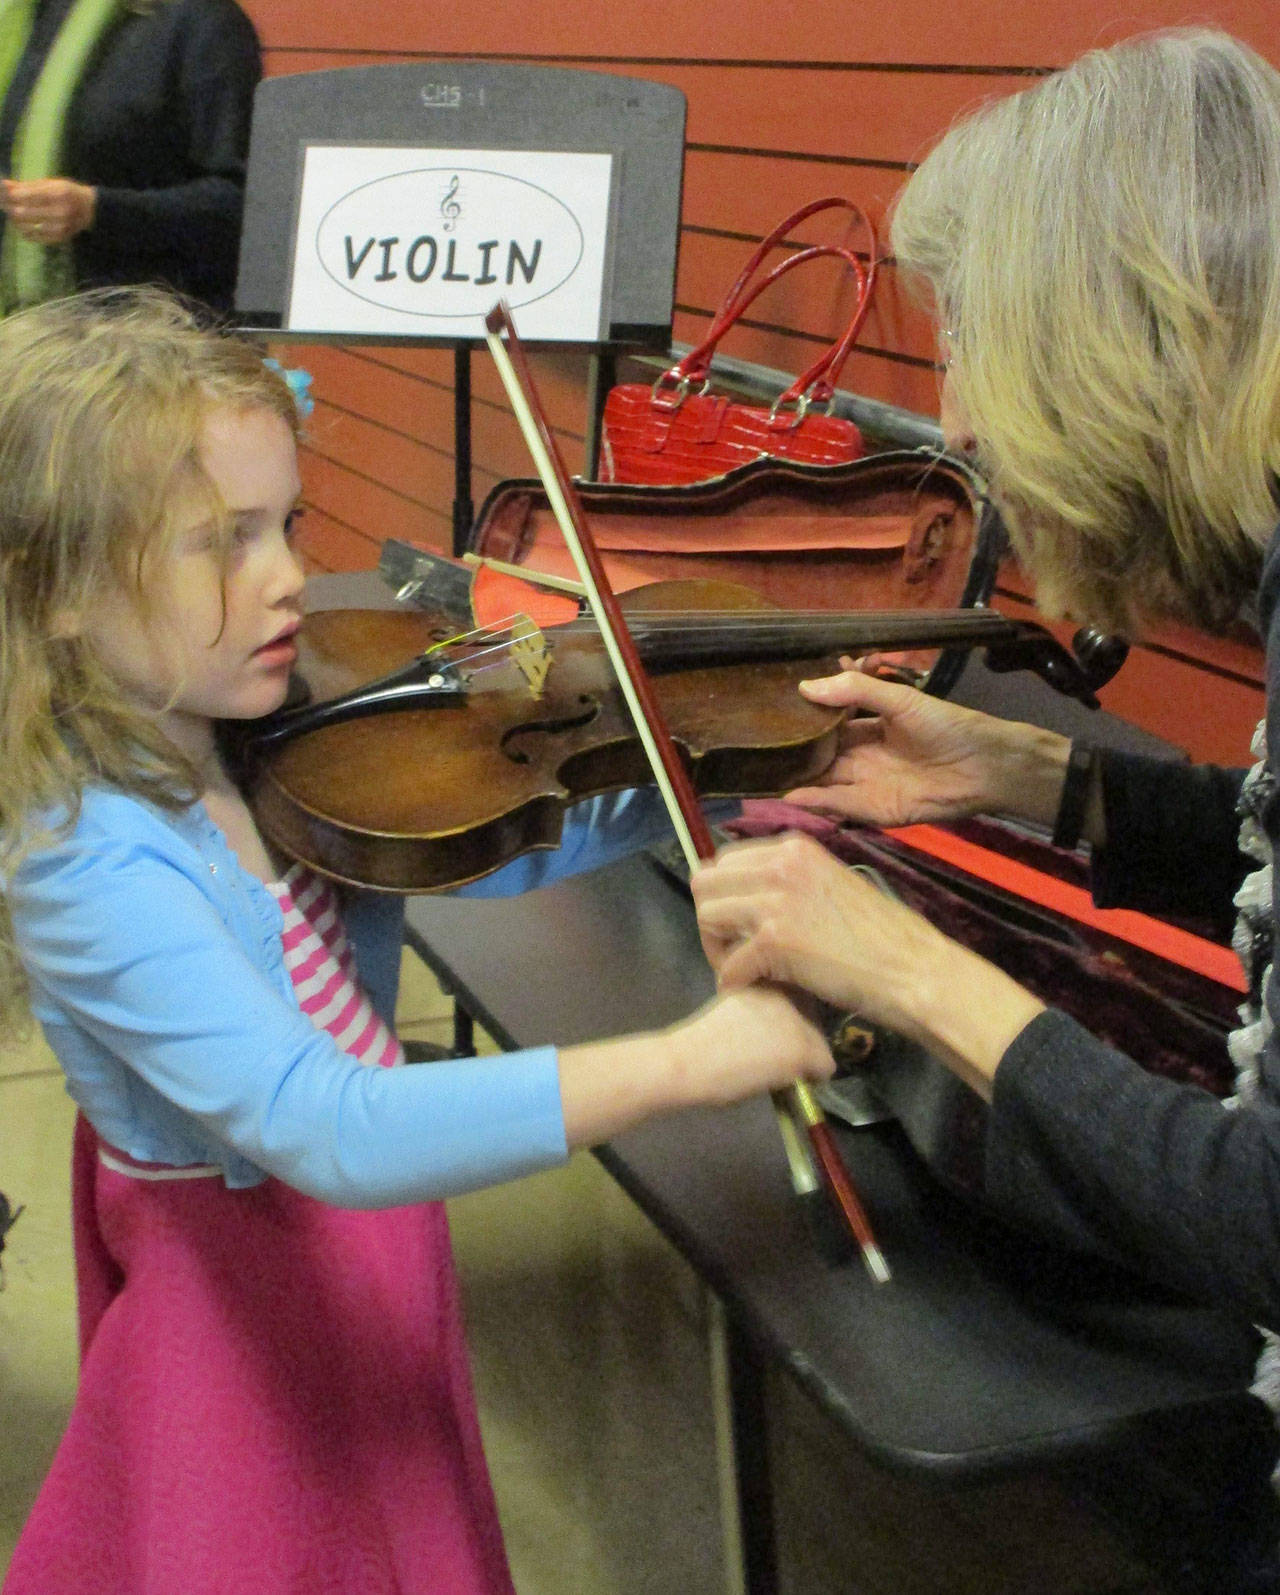 Saratoga Orchestra holds its annual “petting zoo” before “Peter and the Wolf” holiday performances this month. Instruments will be available for a “hands-on” experience for both the young and young-at-heart. Photos provided